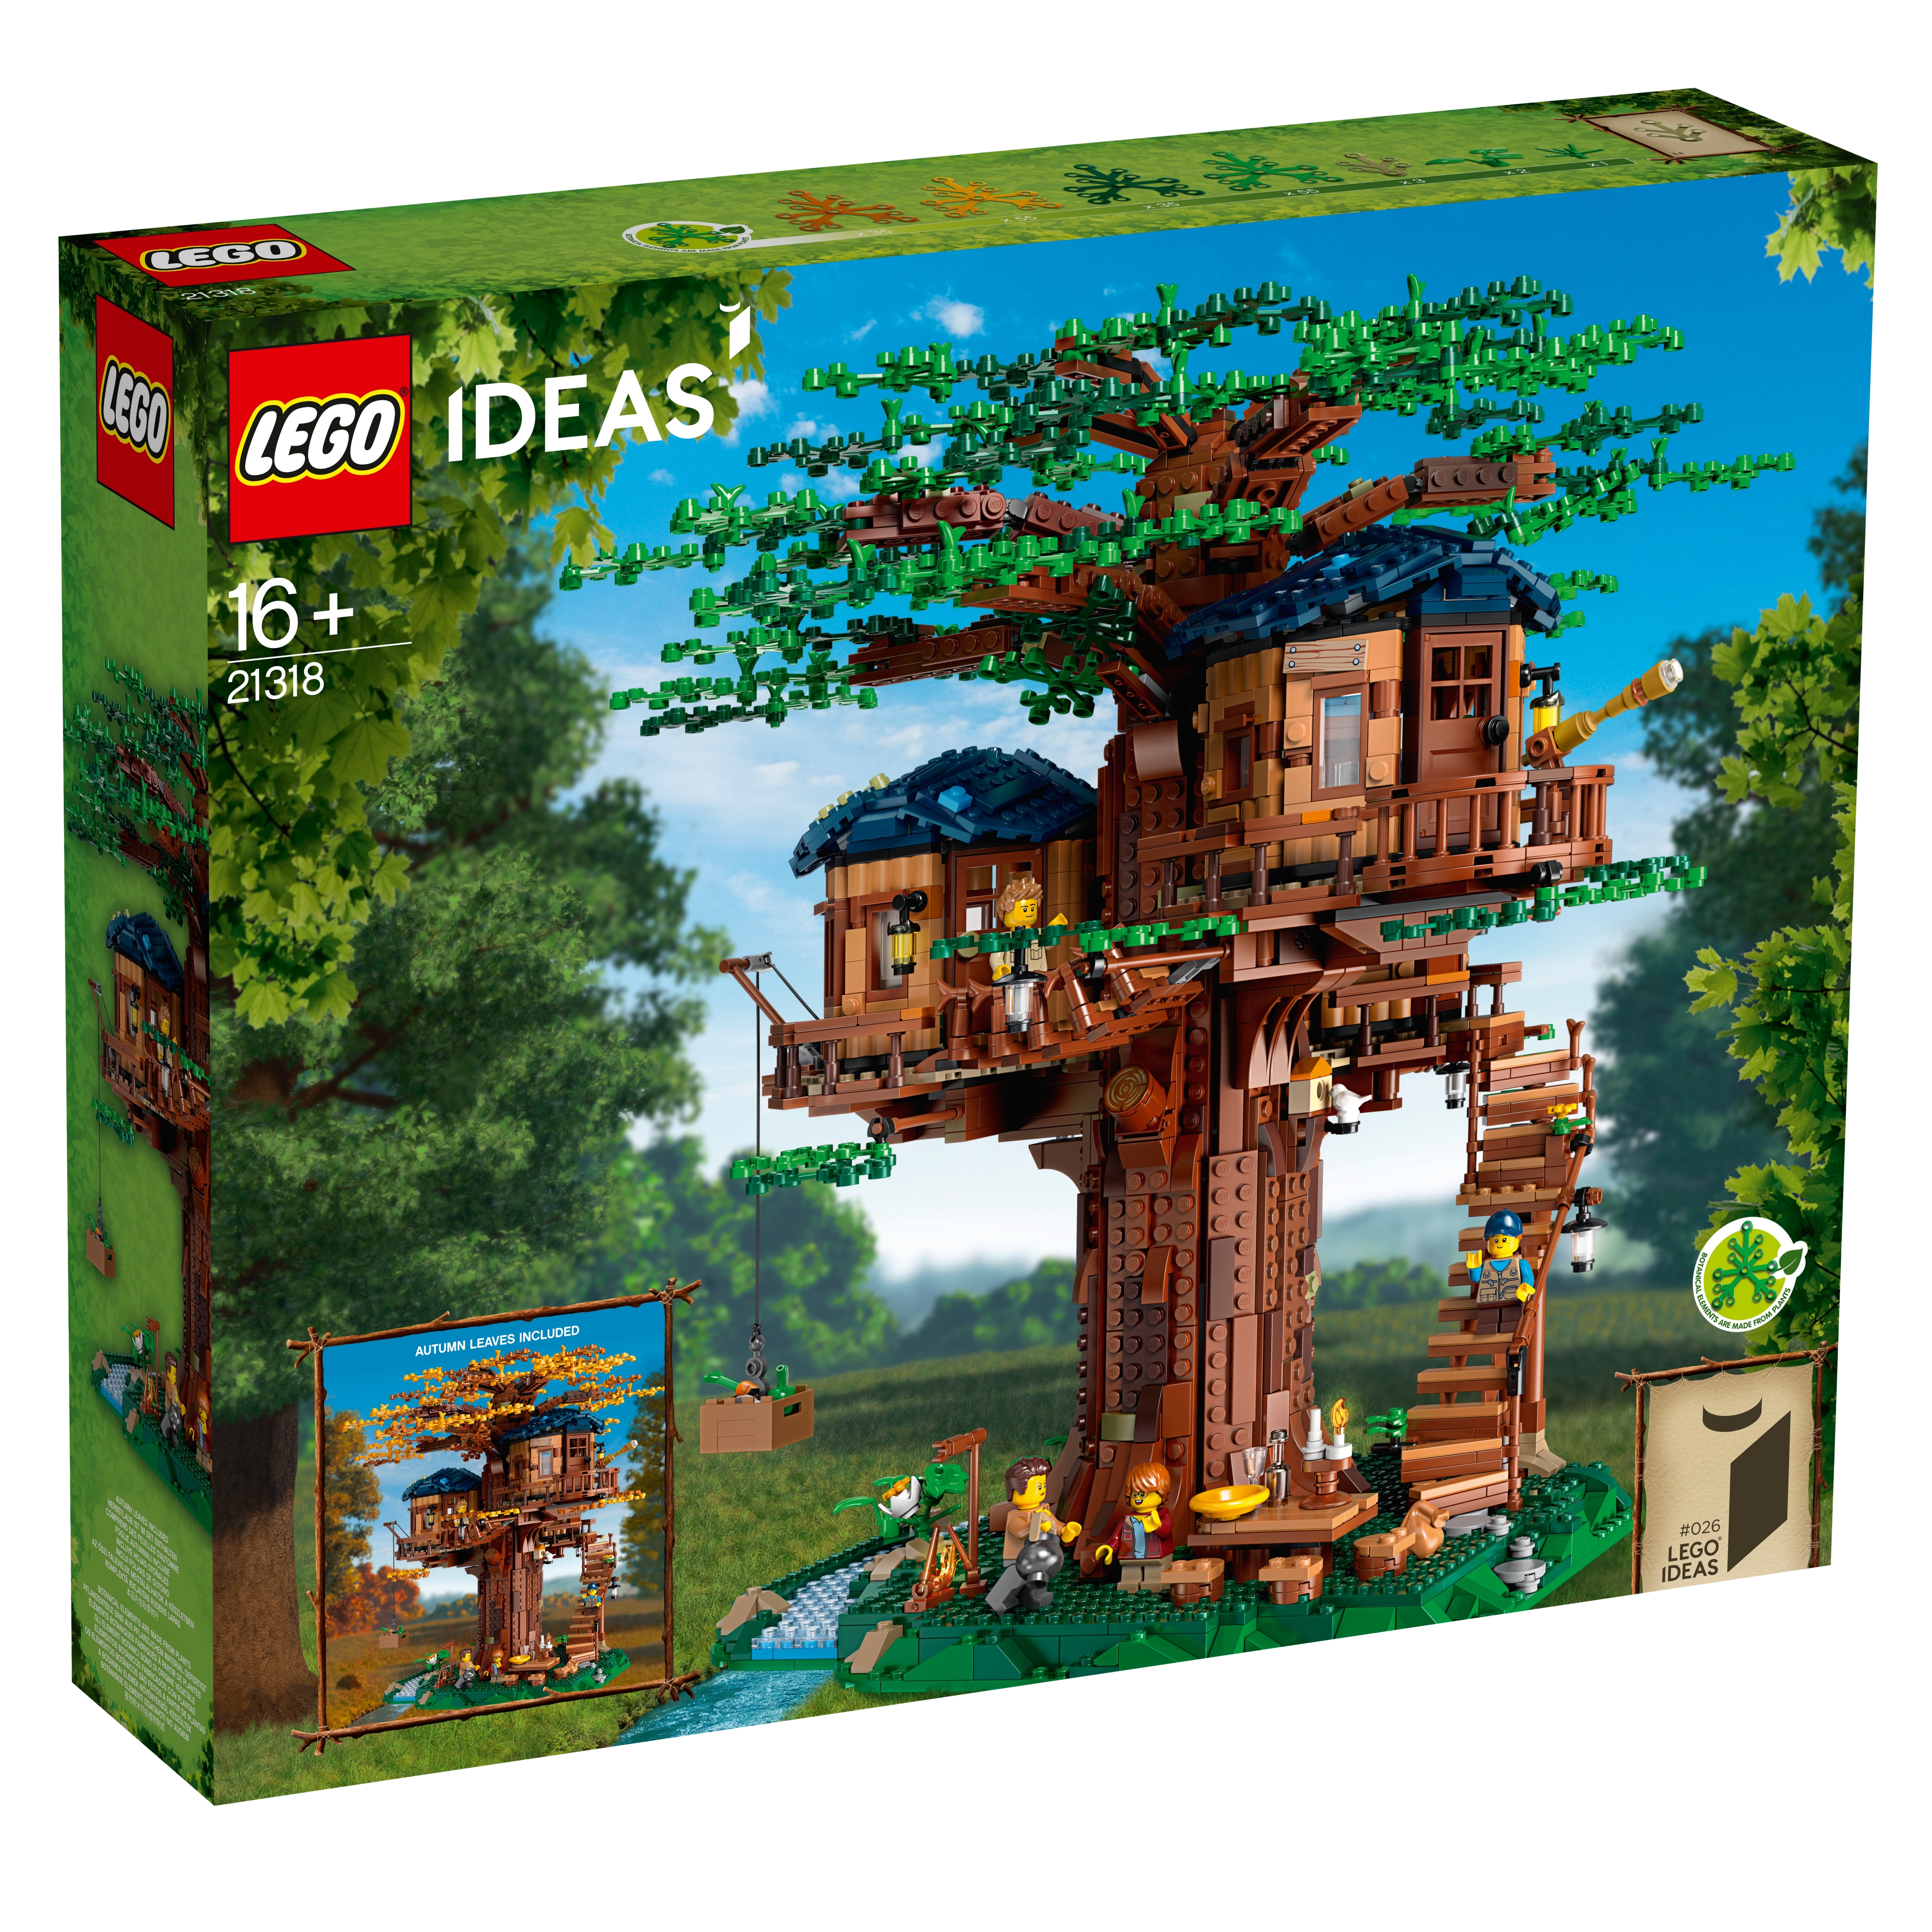 Lego City Tree With Leafs